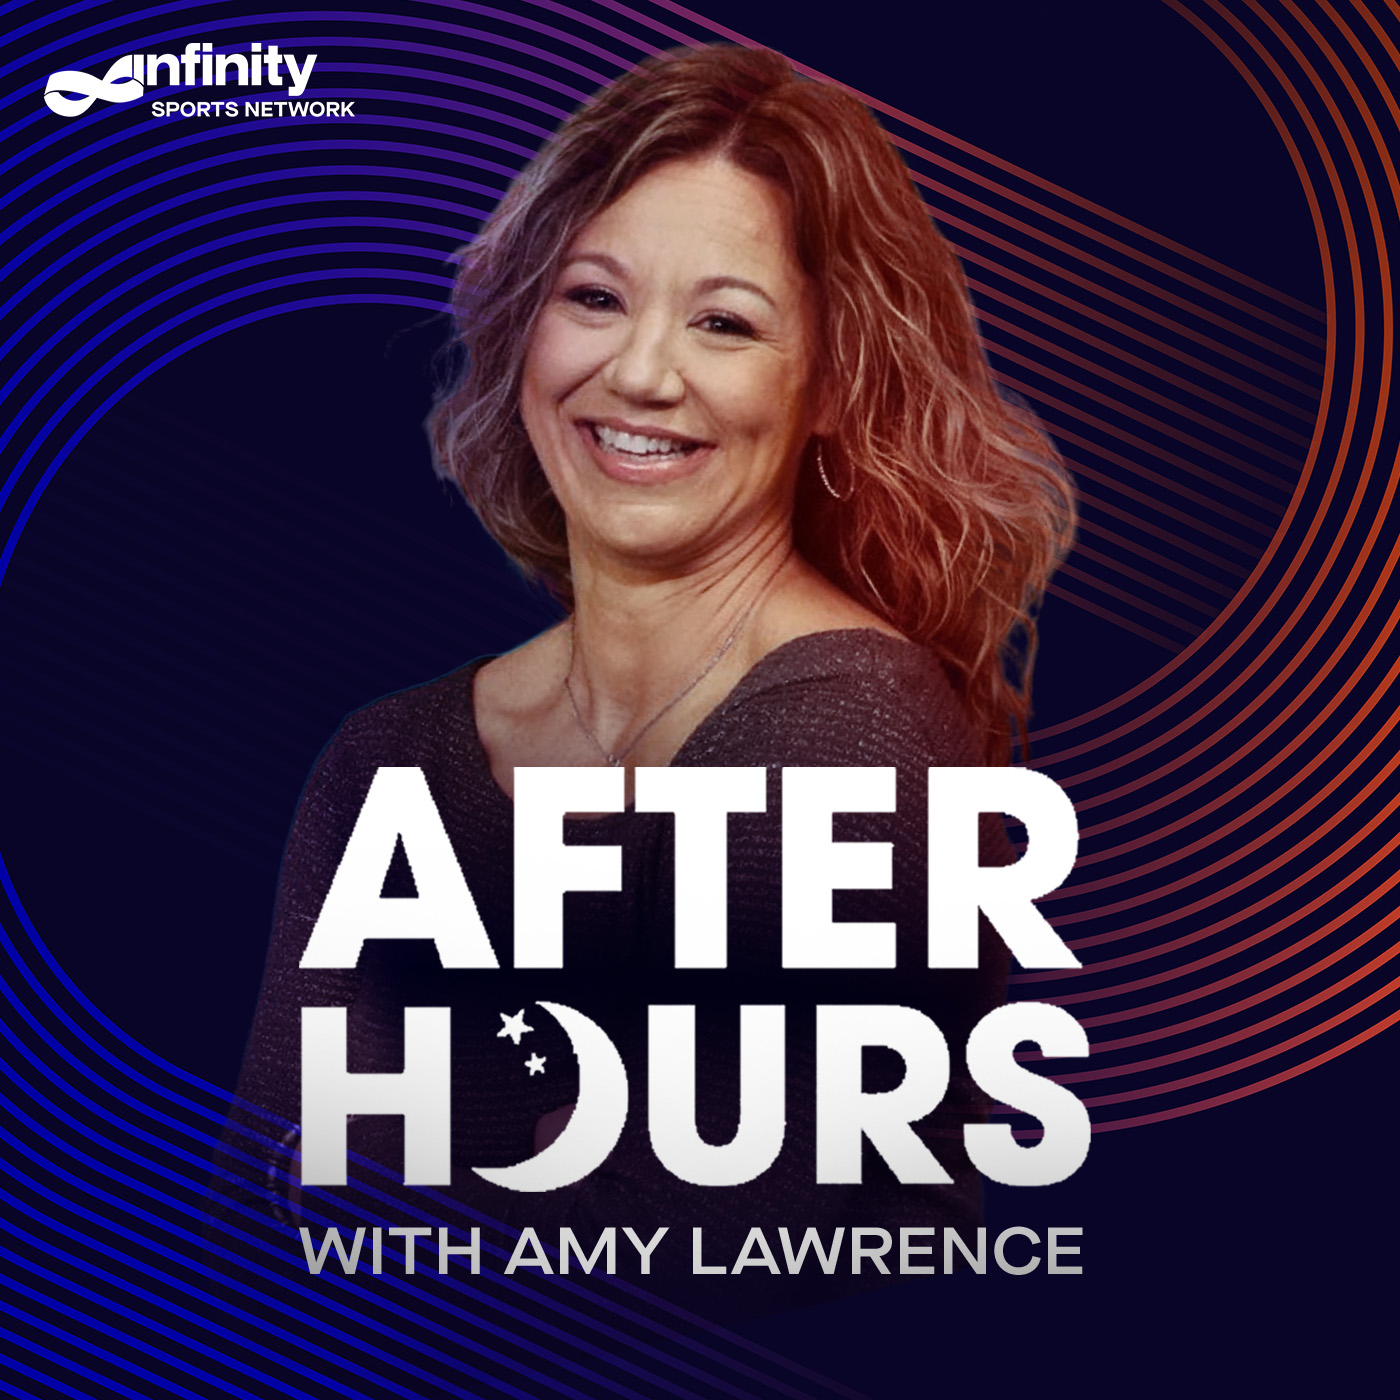 7/26/21 After Hours with Amy Lawrence PODCAST: Hour 4